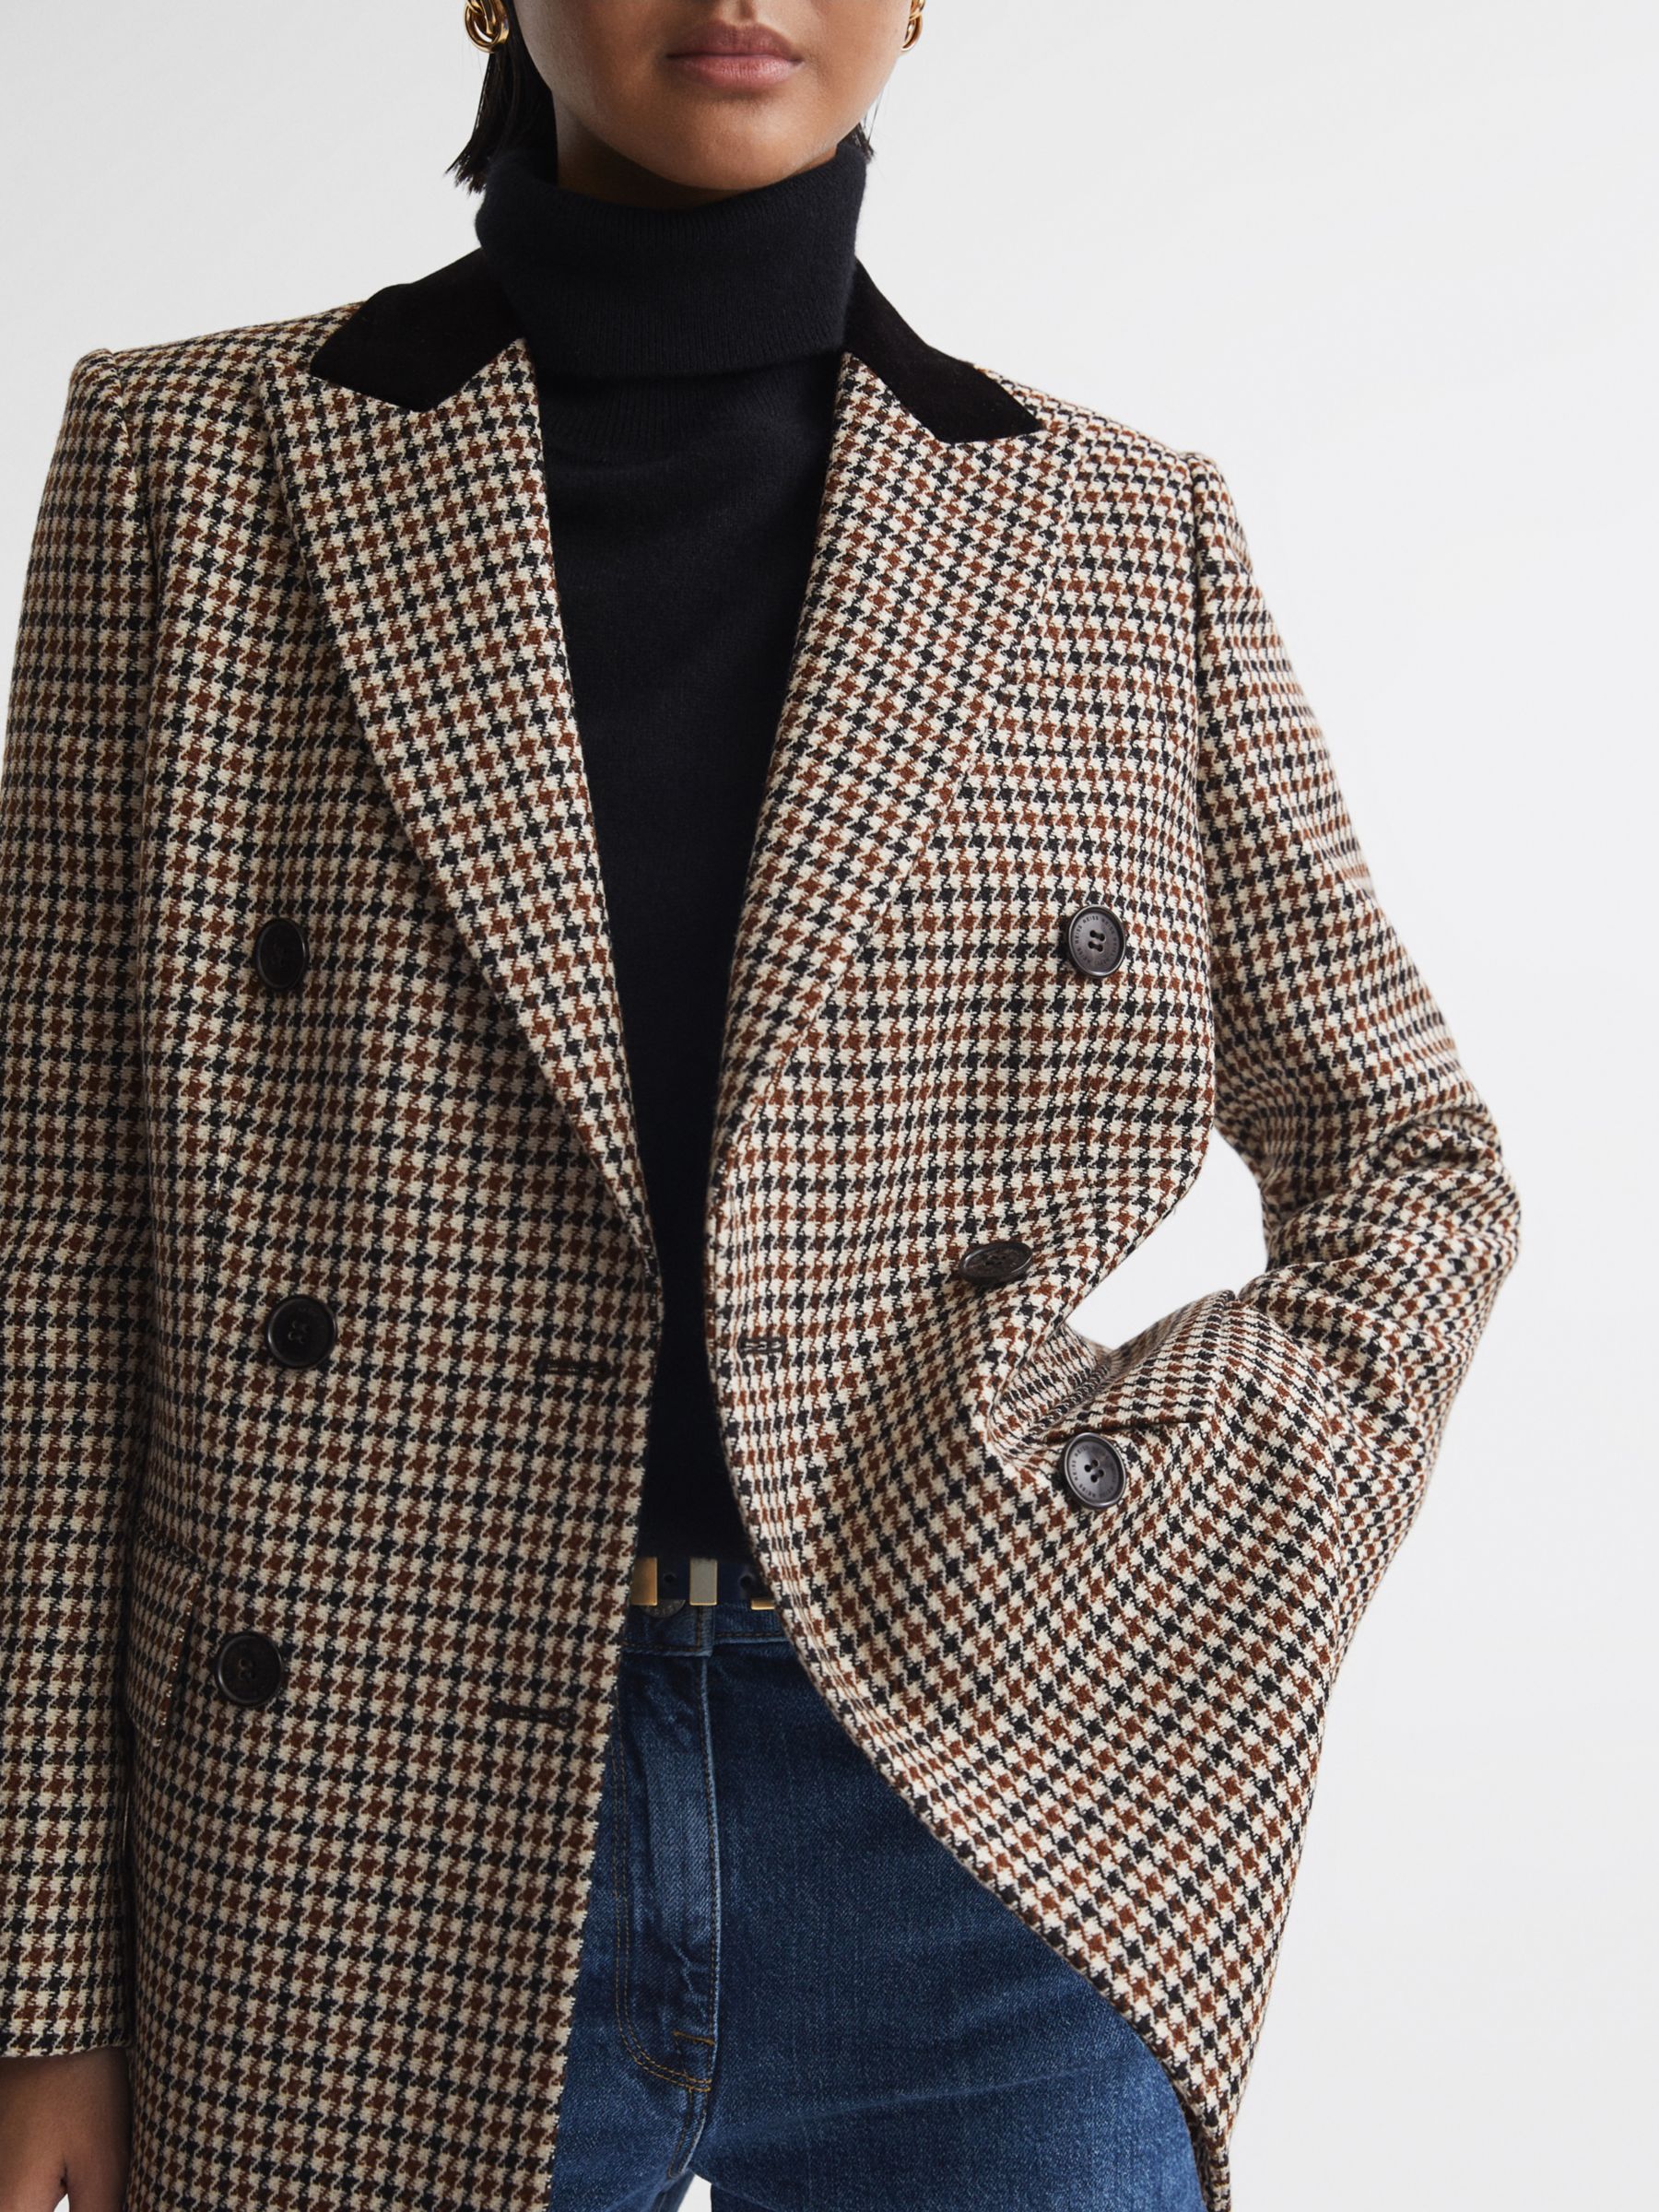 The Single Breasted Houndstooth Blazer